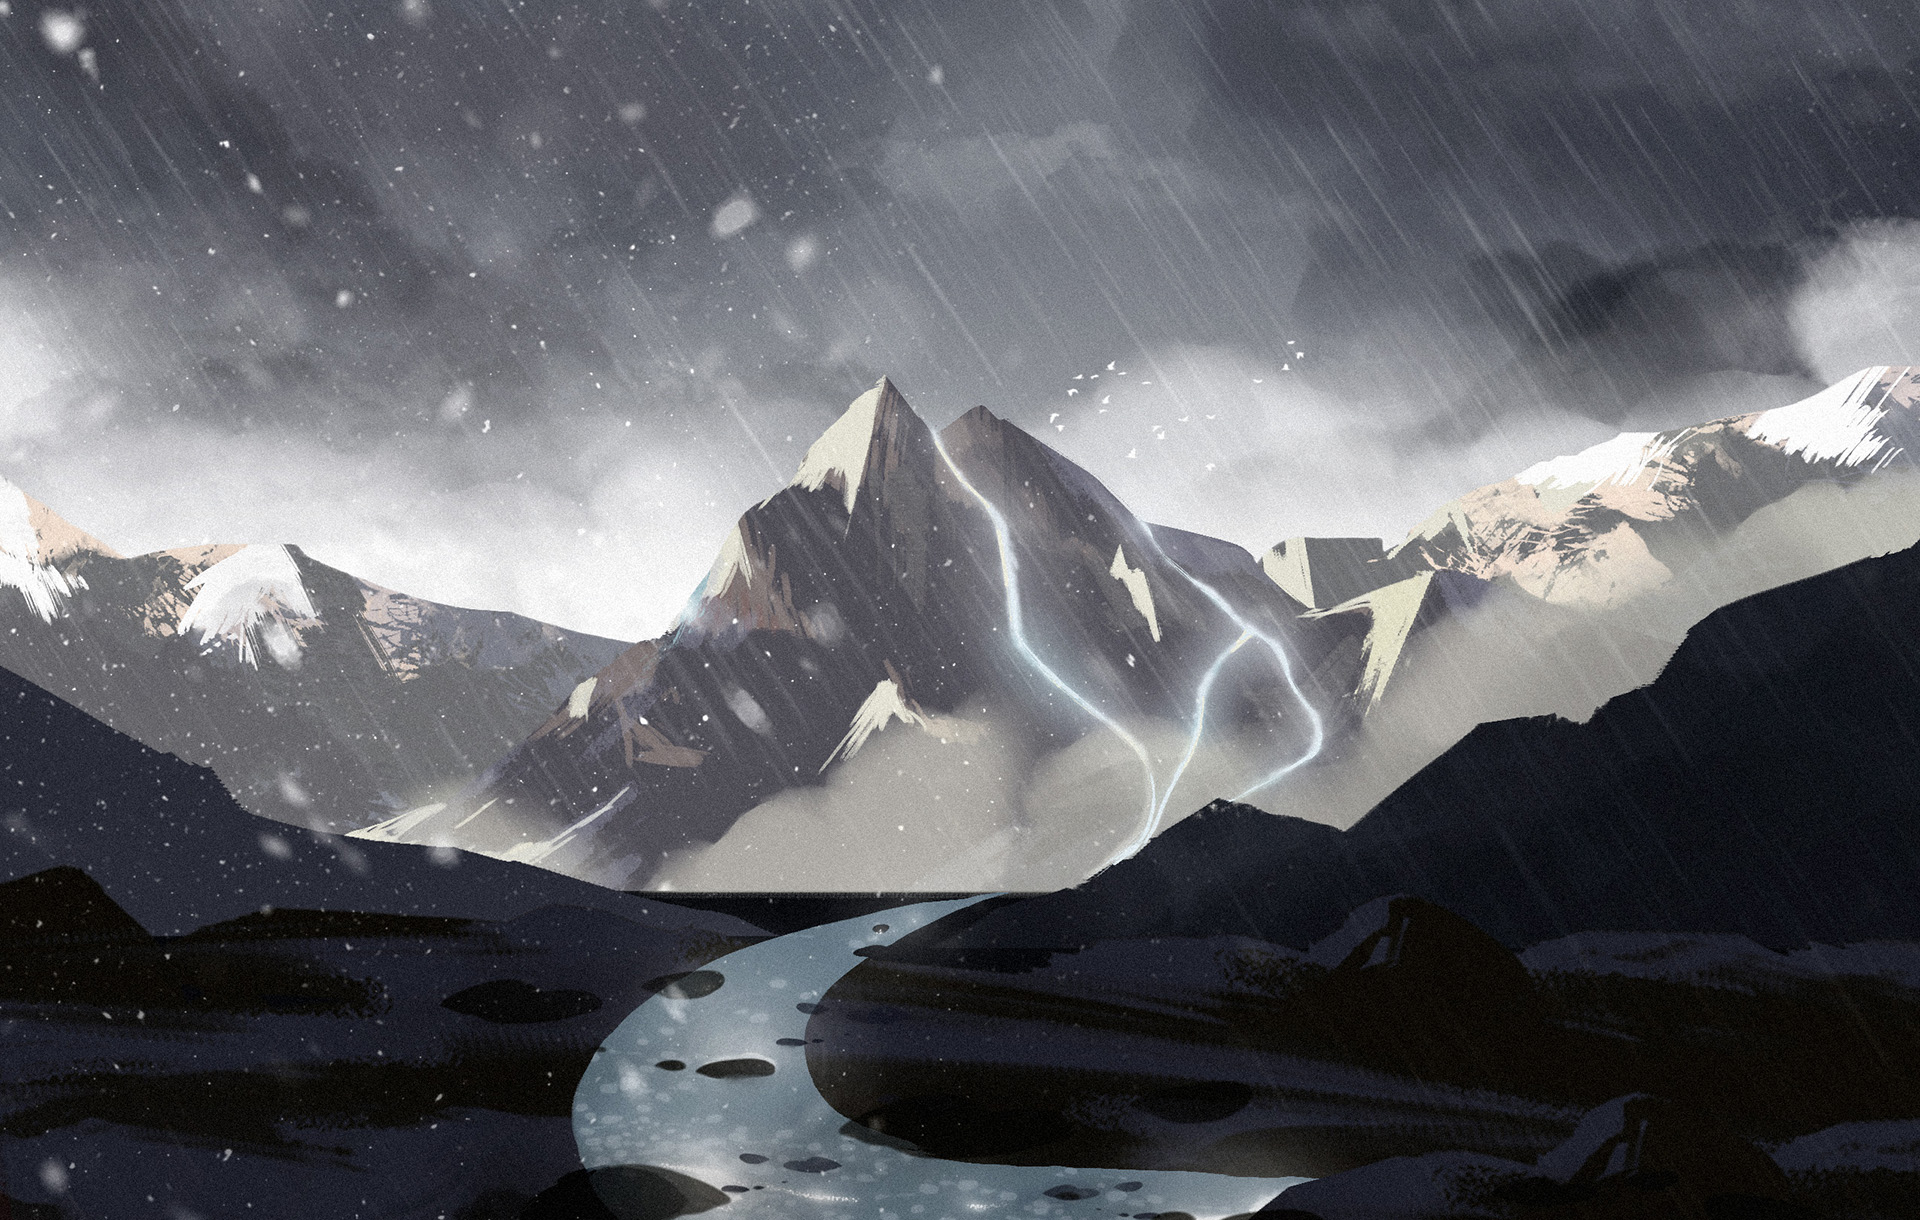 Illustration of snowcapped mountains in the rain, with gray clouds above.